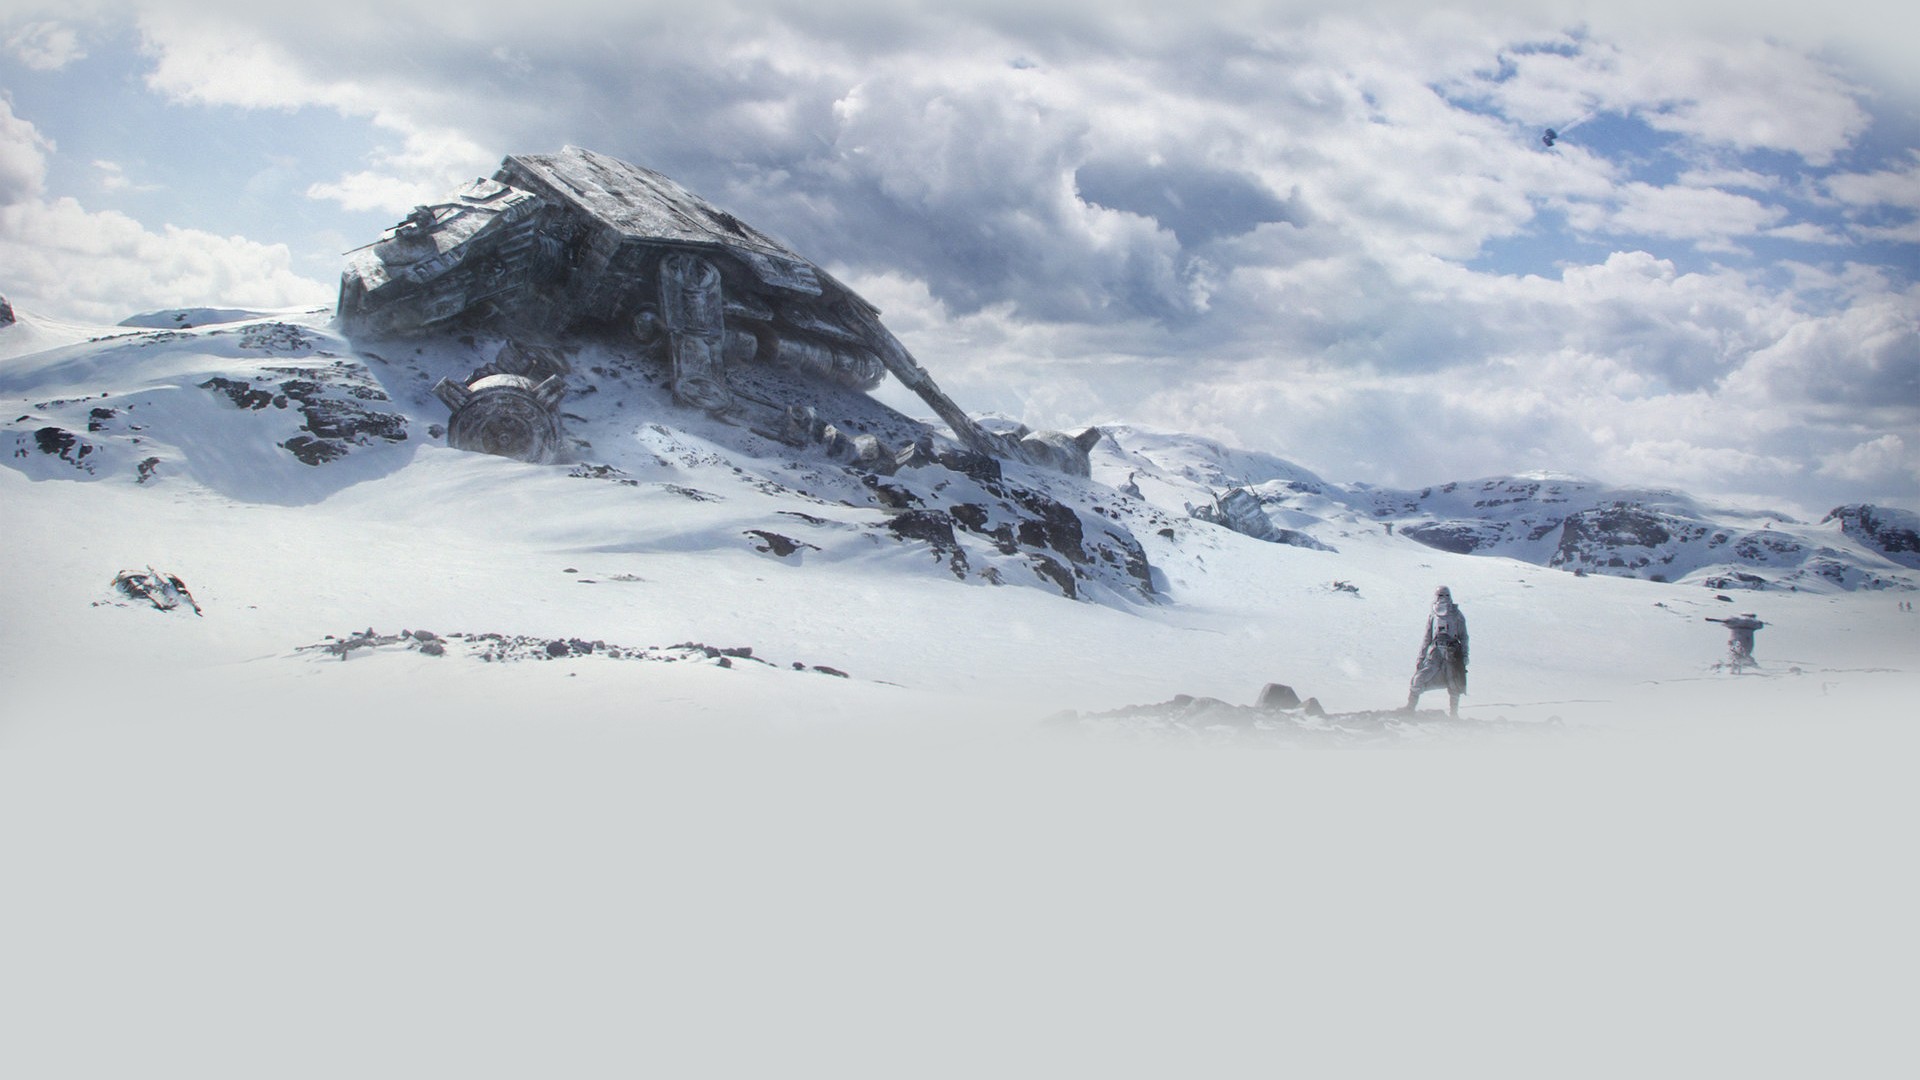 Mountains Snow Stormtrooper Star Wars Hoth AT AT Walker Imperial Forces Wreck Digital Art Planet Sci 1920x1080